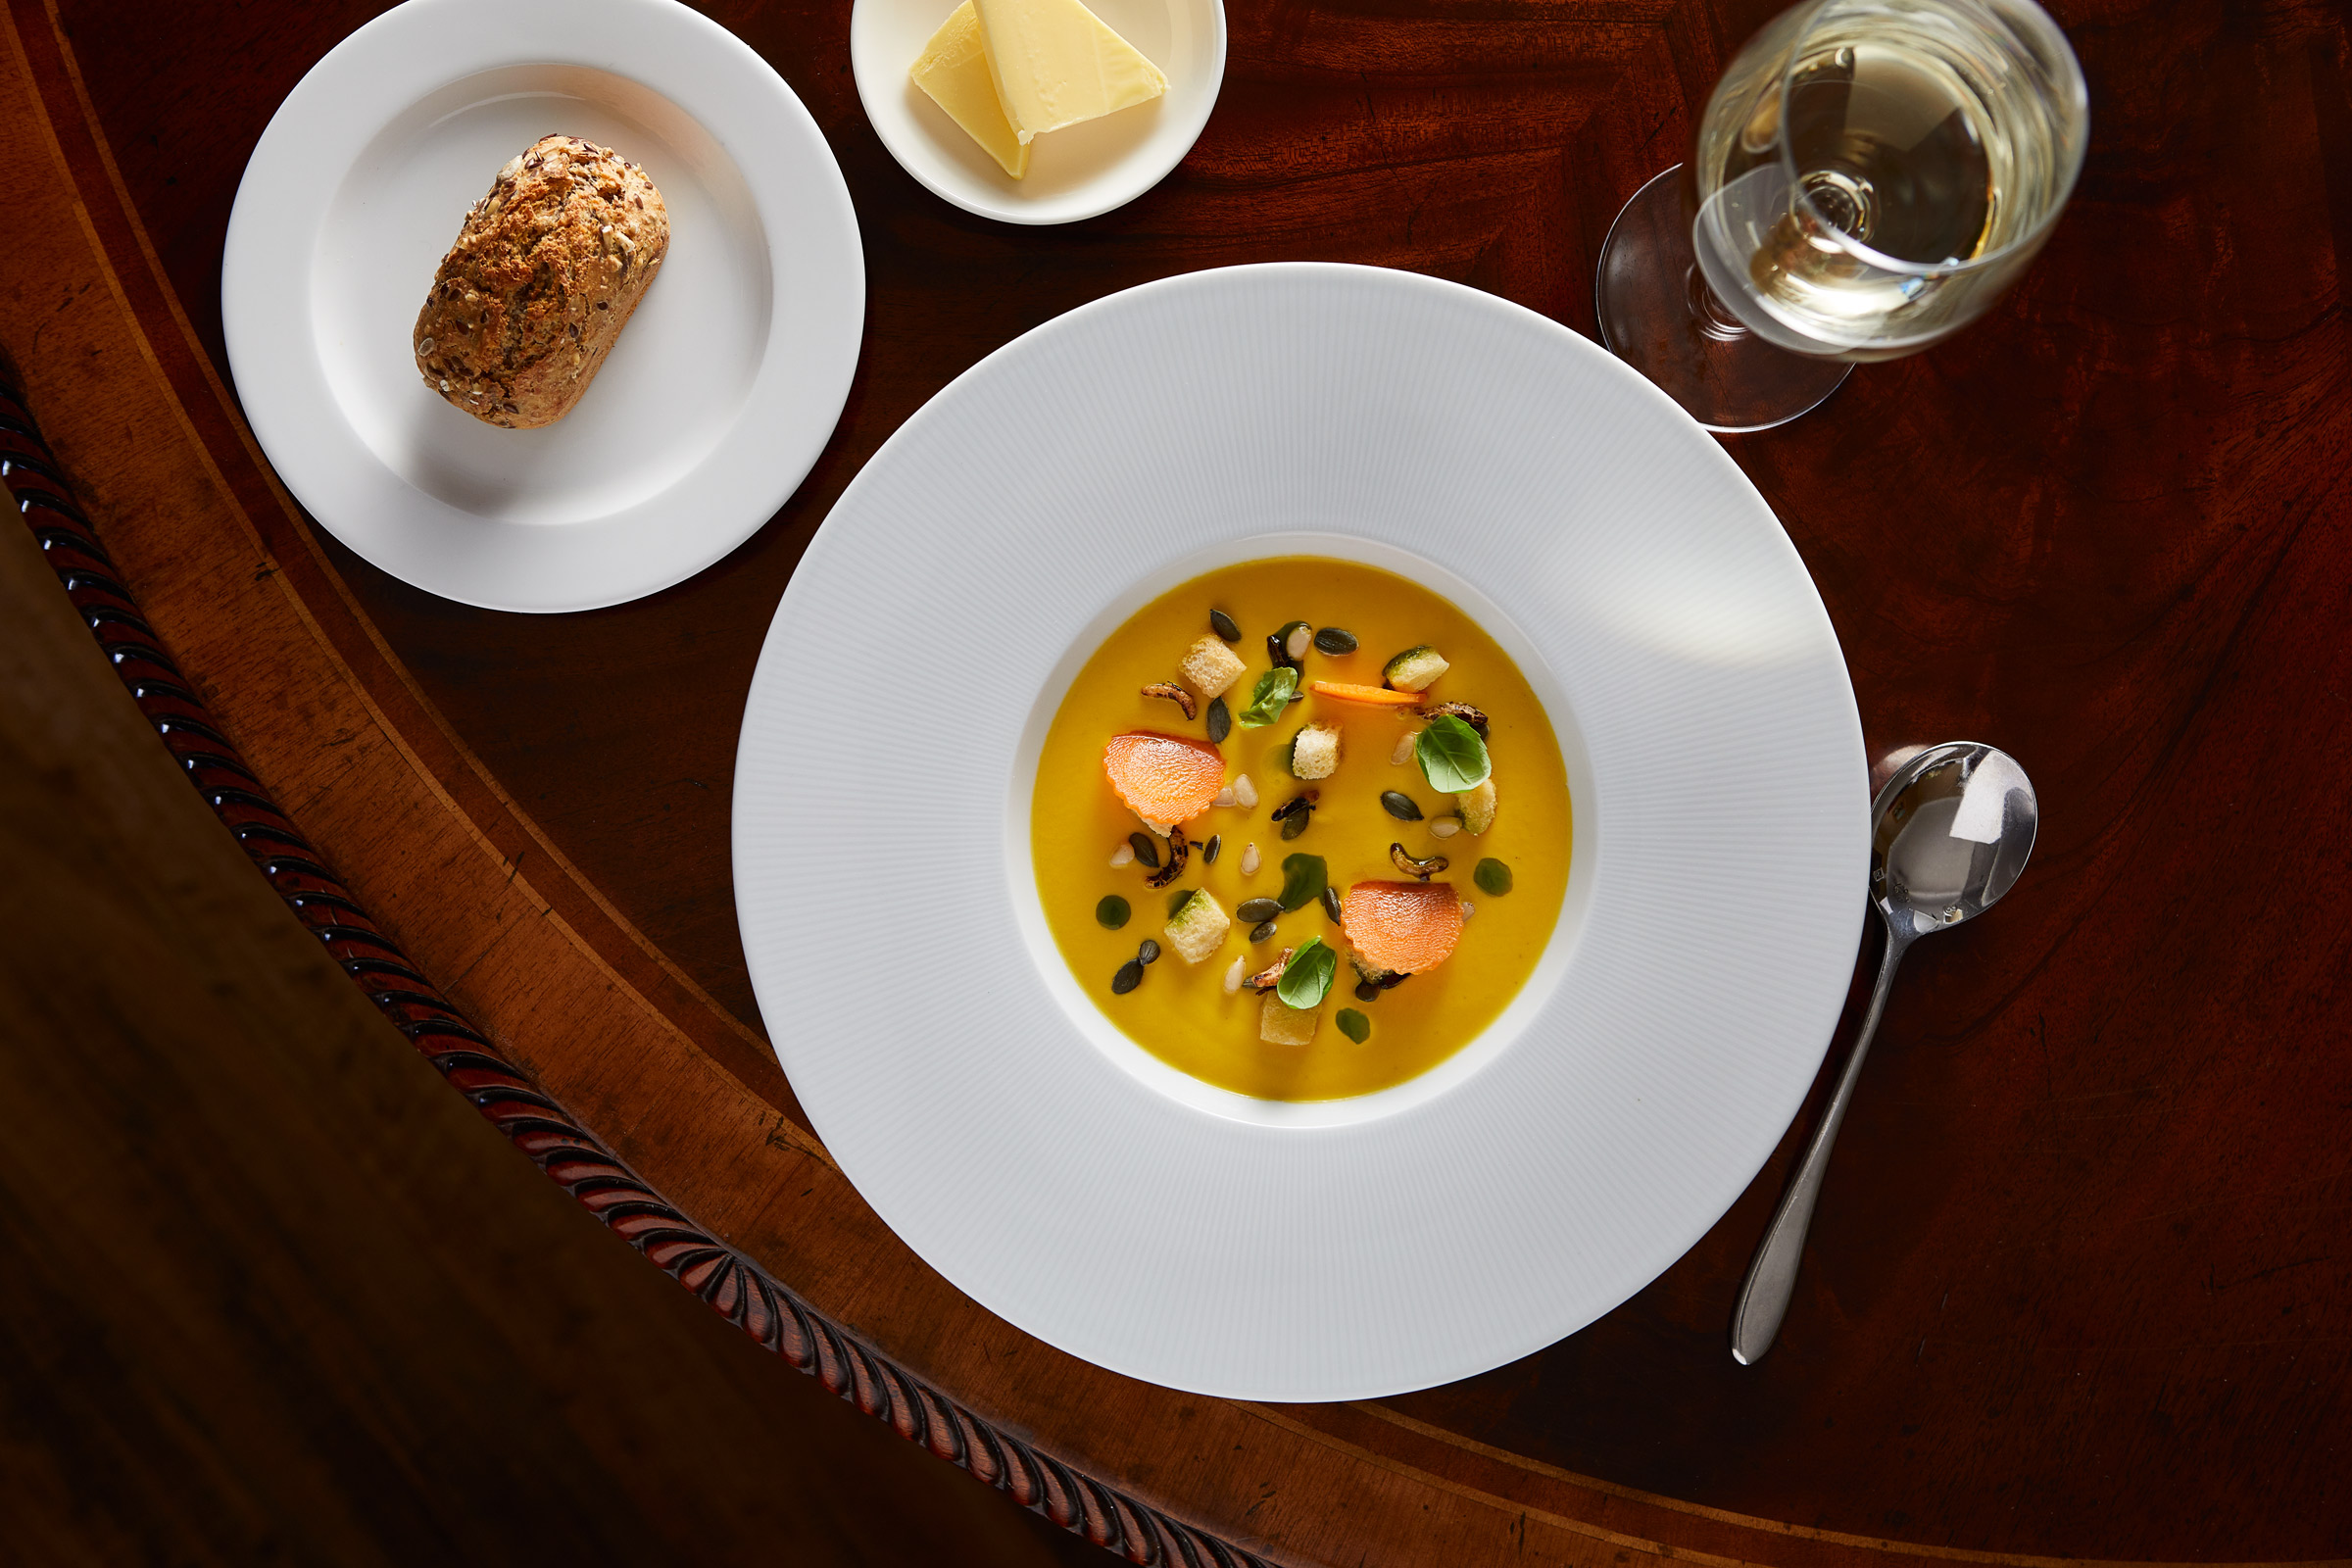 Carrot & Squash Soup with herb oil and toasted sunflower seeds at The Drumosse Hotel